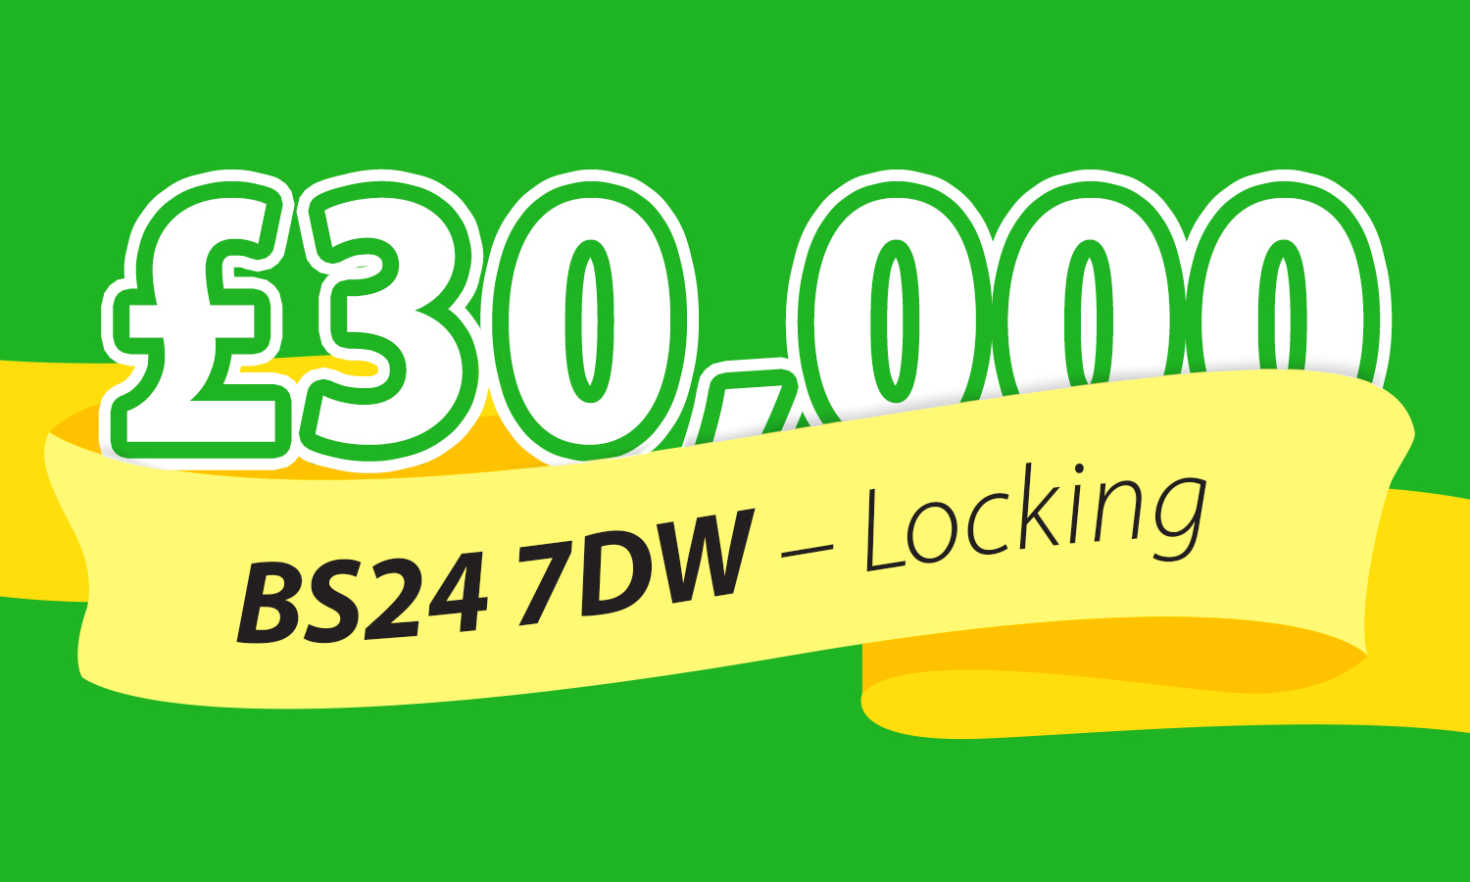 Lucky Locking players have scooped £30,000 each in Saturday's Street Prize